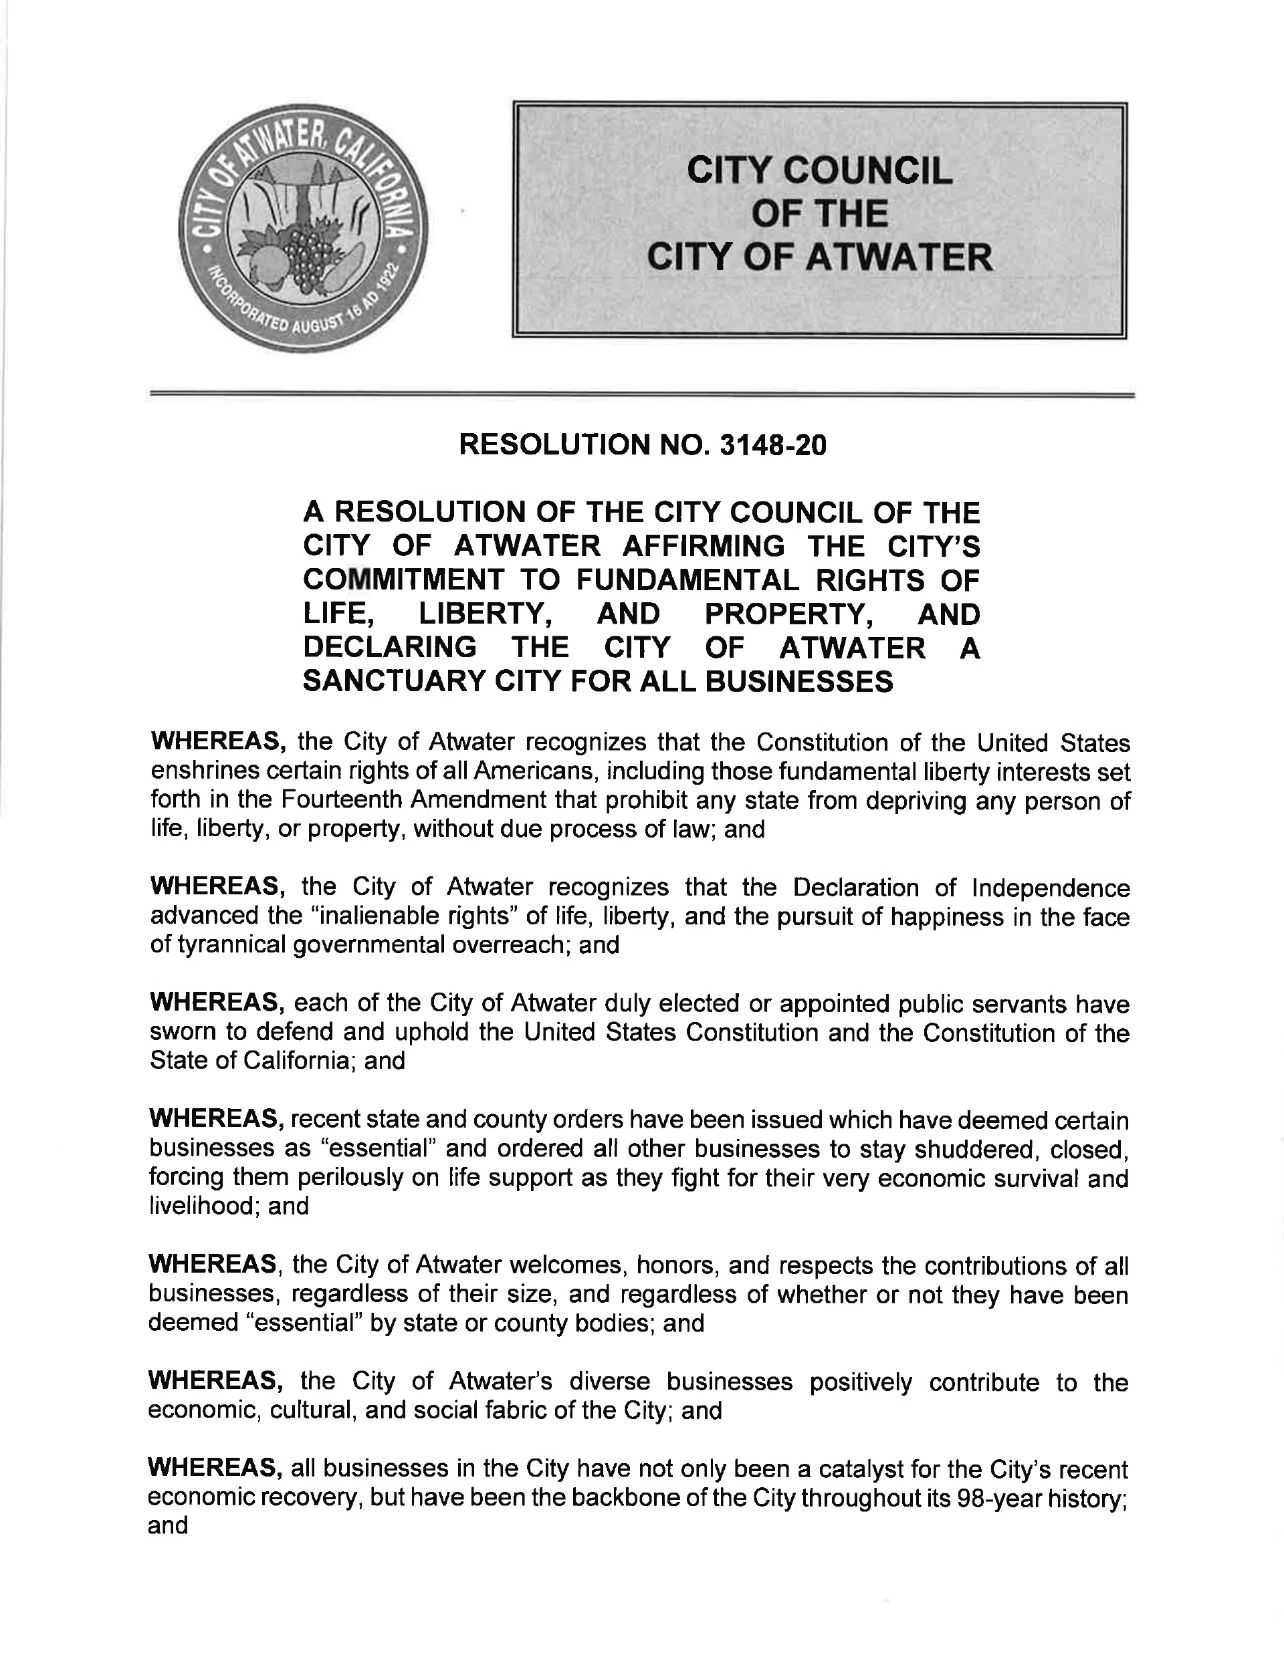 Atwater Resolution No. 3148-20 - pg 1